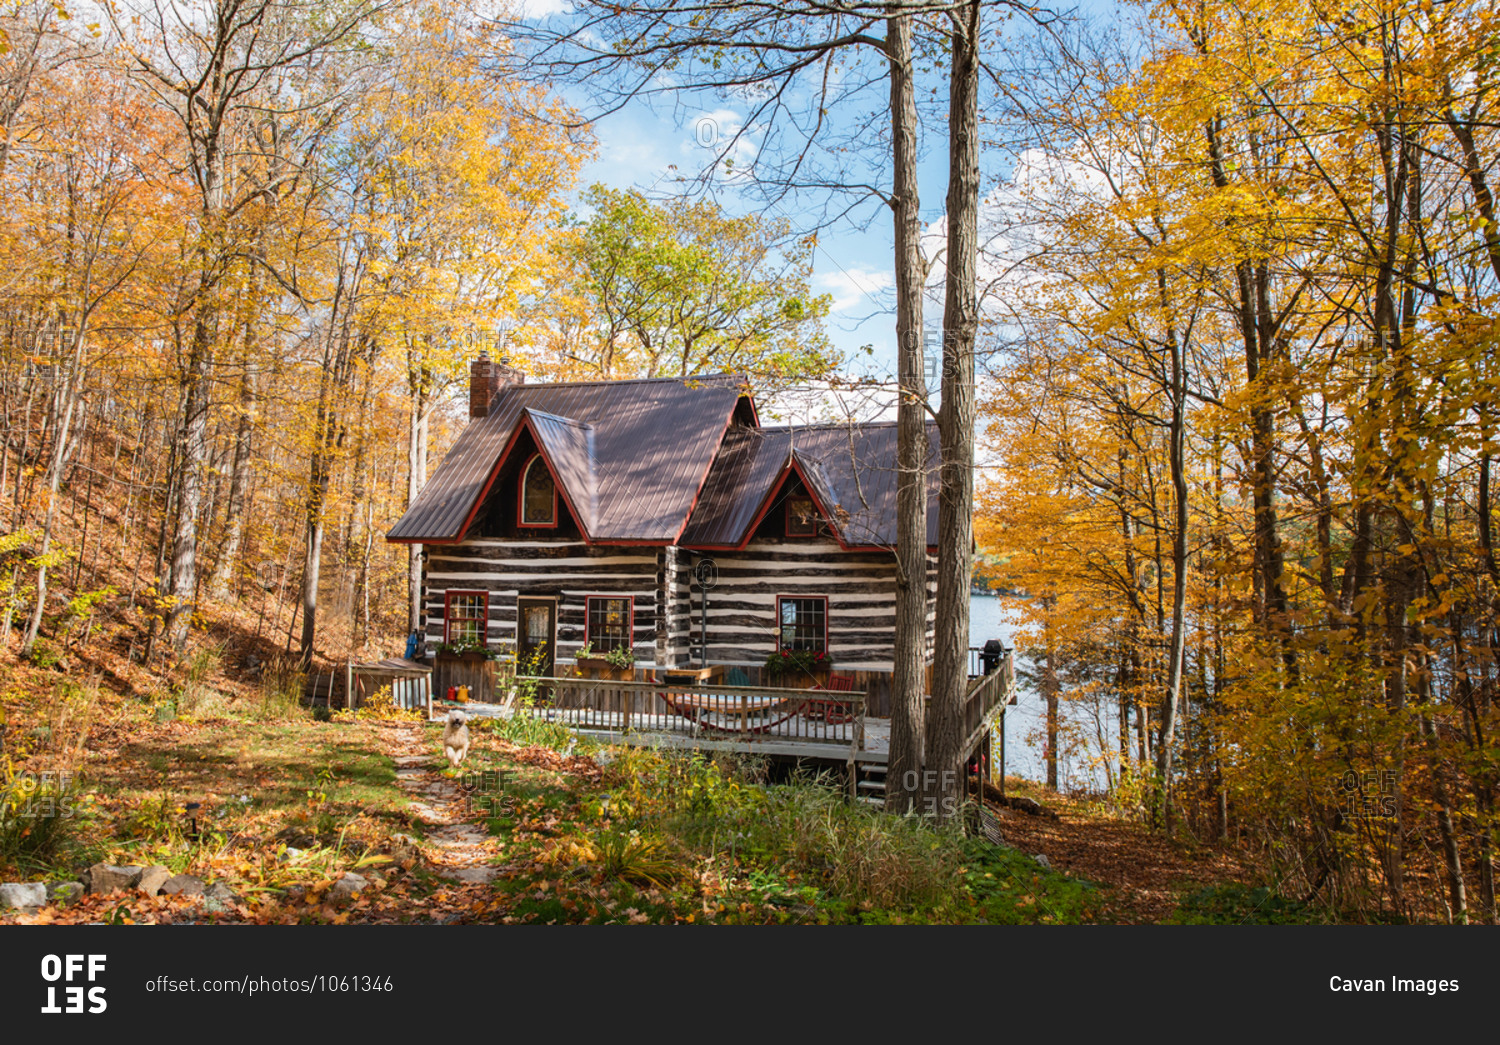 Log cabin cottage in the woods in Ontario, Canada on a fall day.